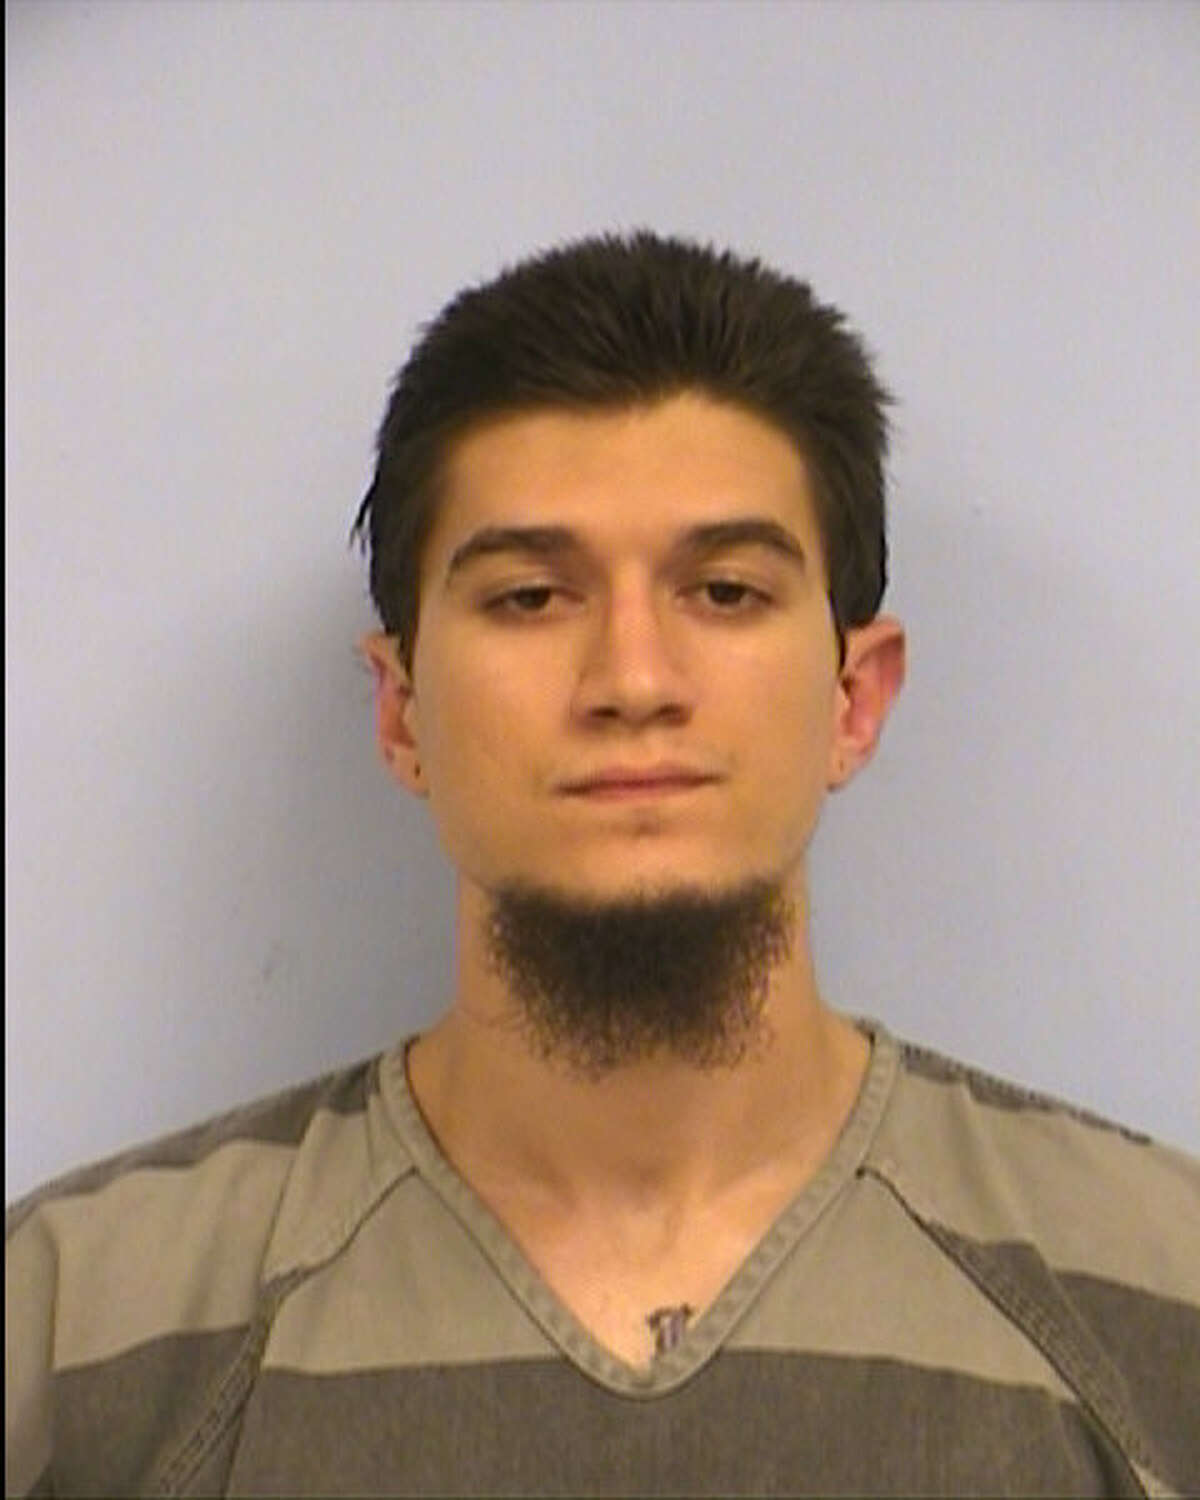 A federal judge sentenced Michael Wolfe, a 24-year-old Austin resident, to more than six years in federal prison on Friday for attempting to join the terrorist group known as the Islamic State. Wolfe pleaded guilty in June 2014 to attempting to provide material support and resources to a foreign terrorist organization, according to a U.S. Attorney's Office news release.